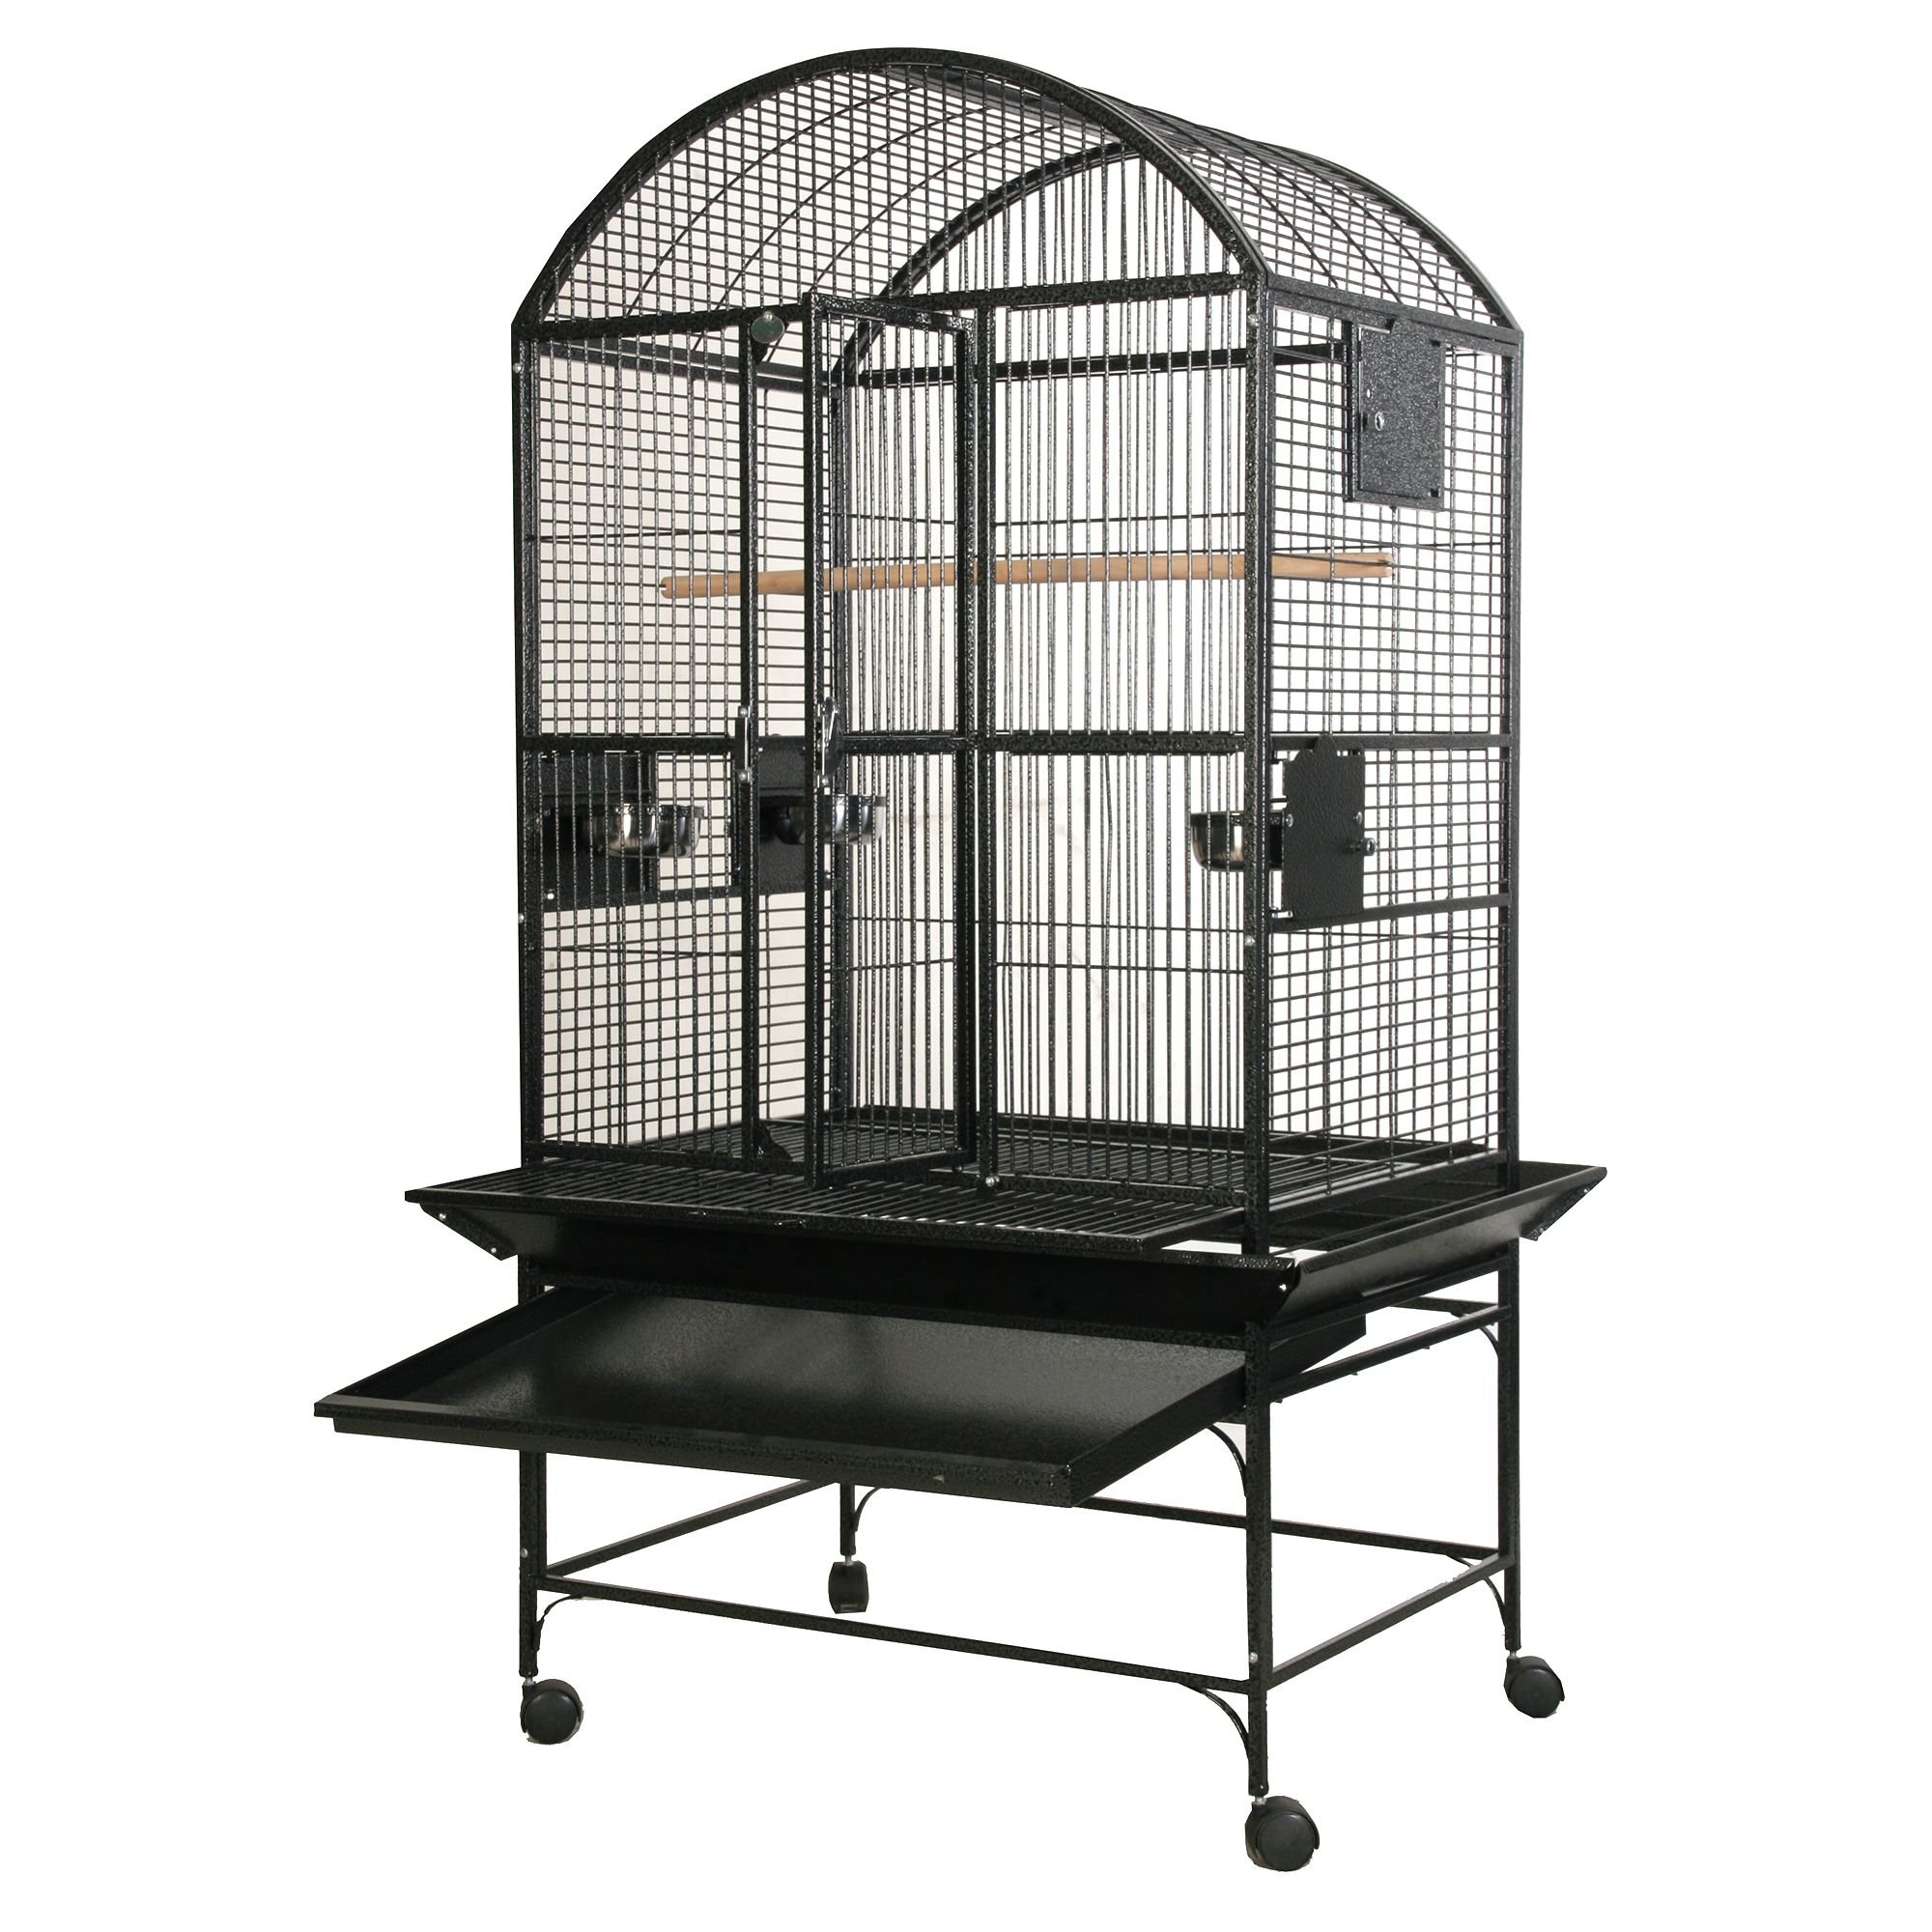 A E Cage Company Dome Top Bird Cage Bird Cages Petsmart